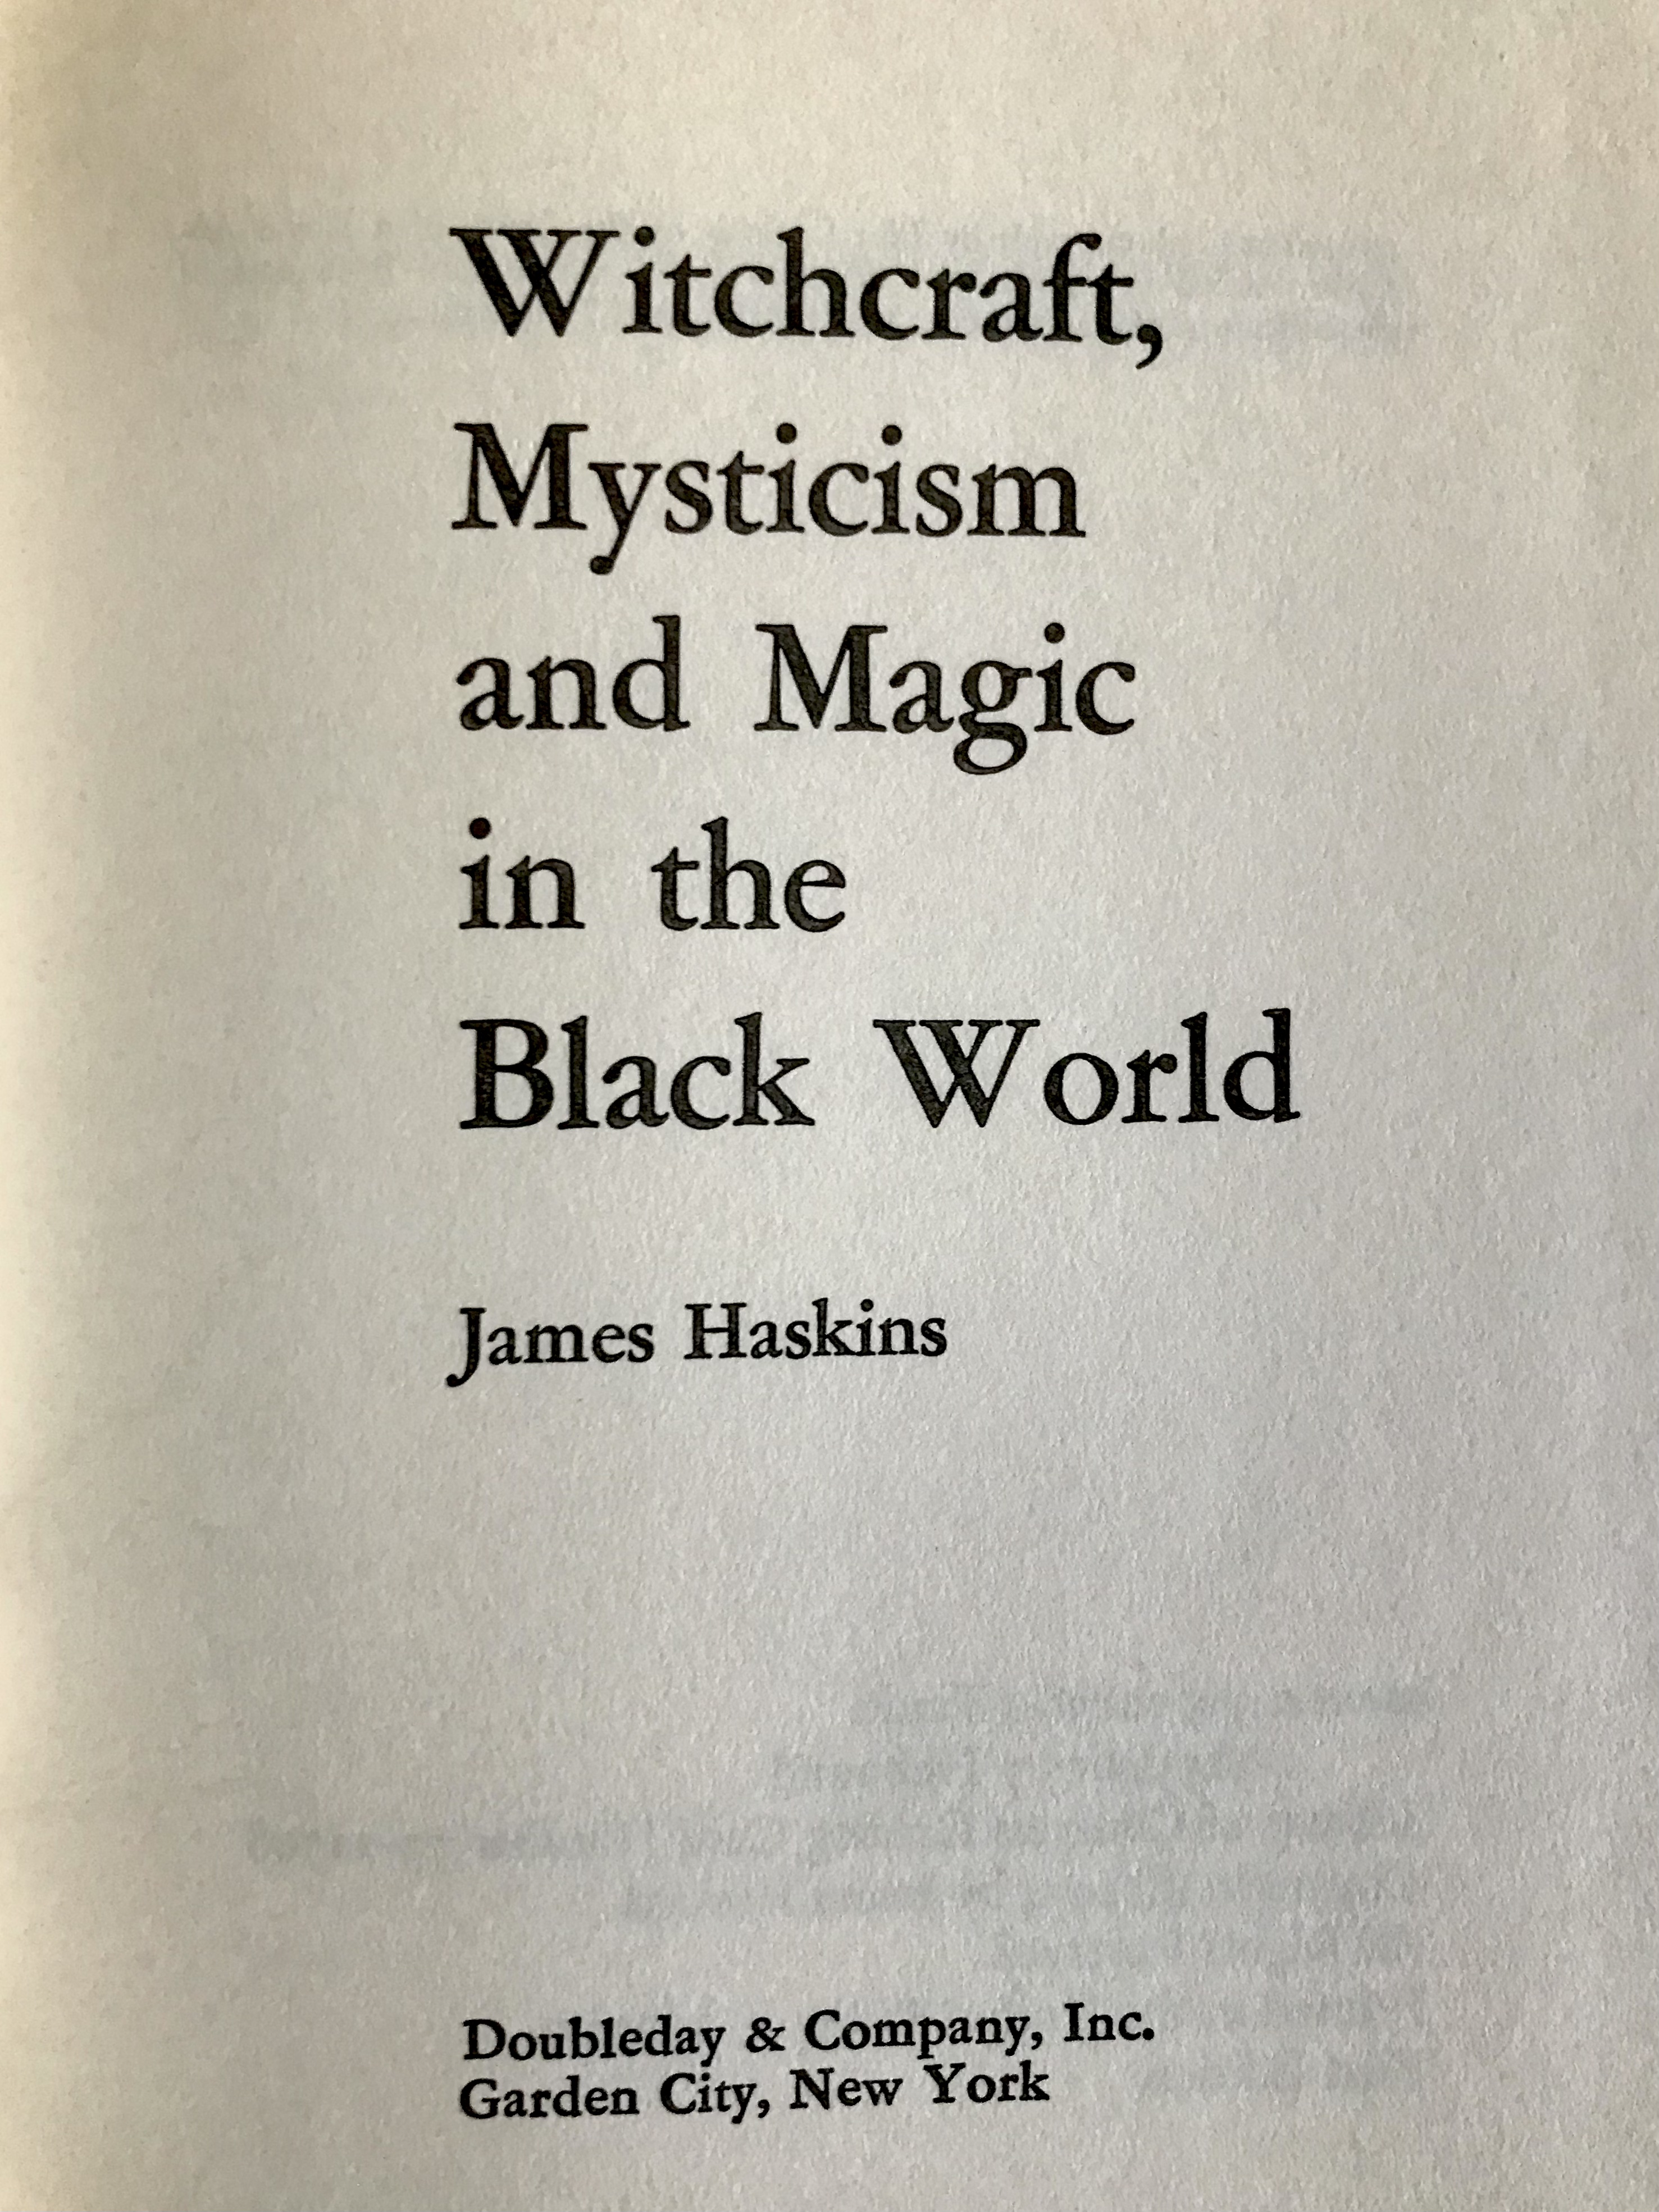 Witchcraft, Mysticism & Magic In The Black World by James Haskins